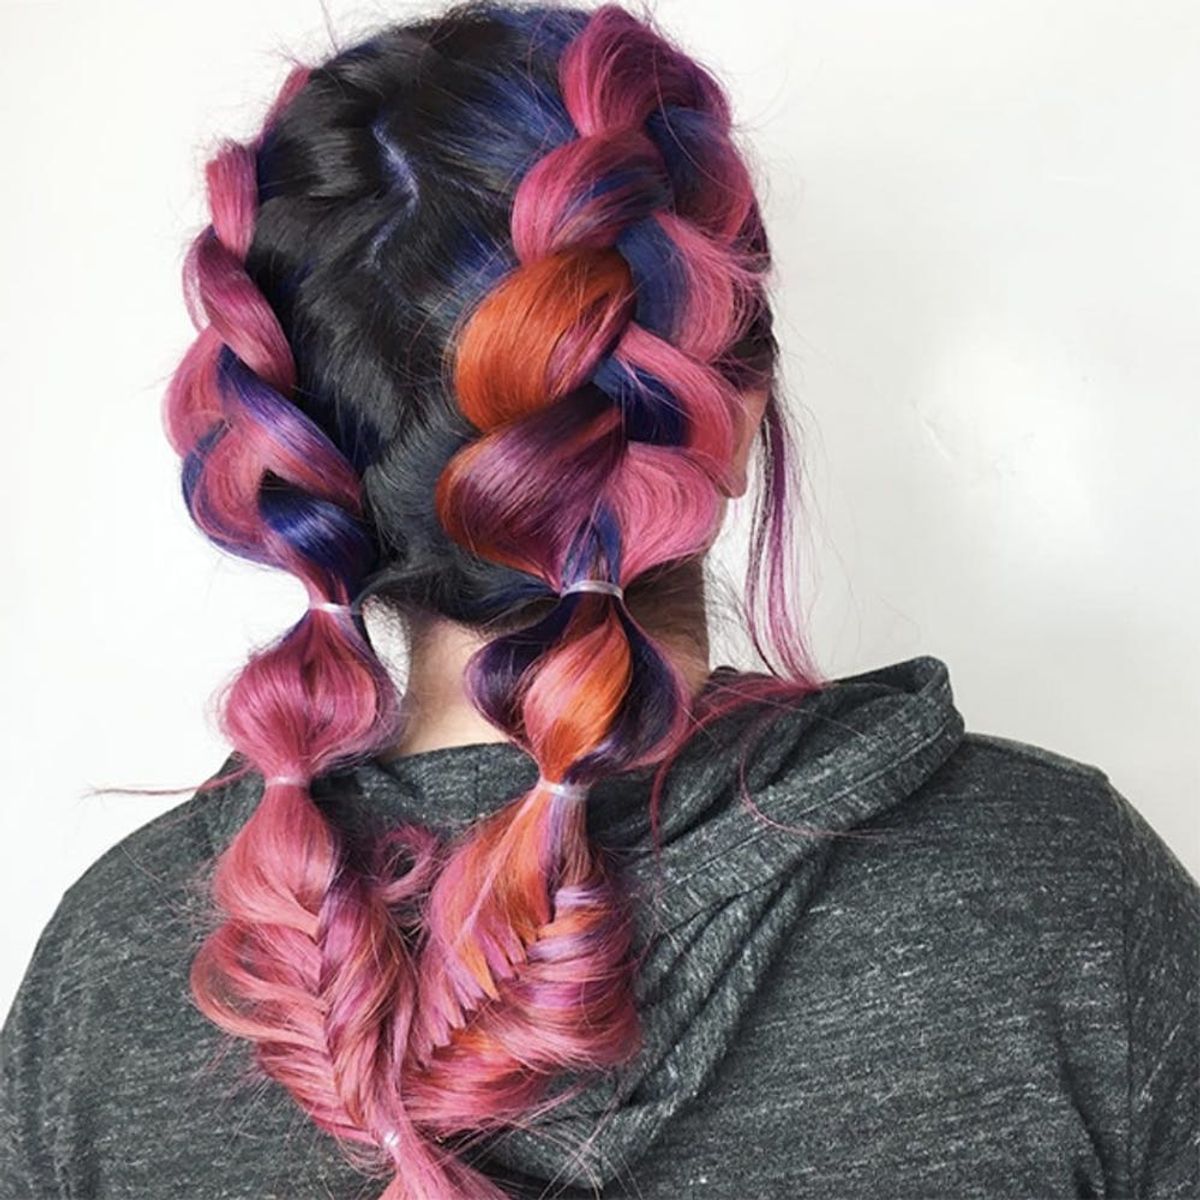 30 French Braid Hairstyles to Rock ASAP